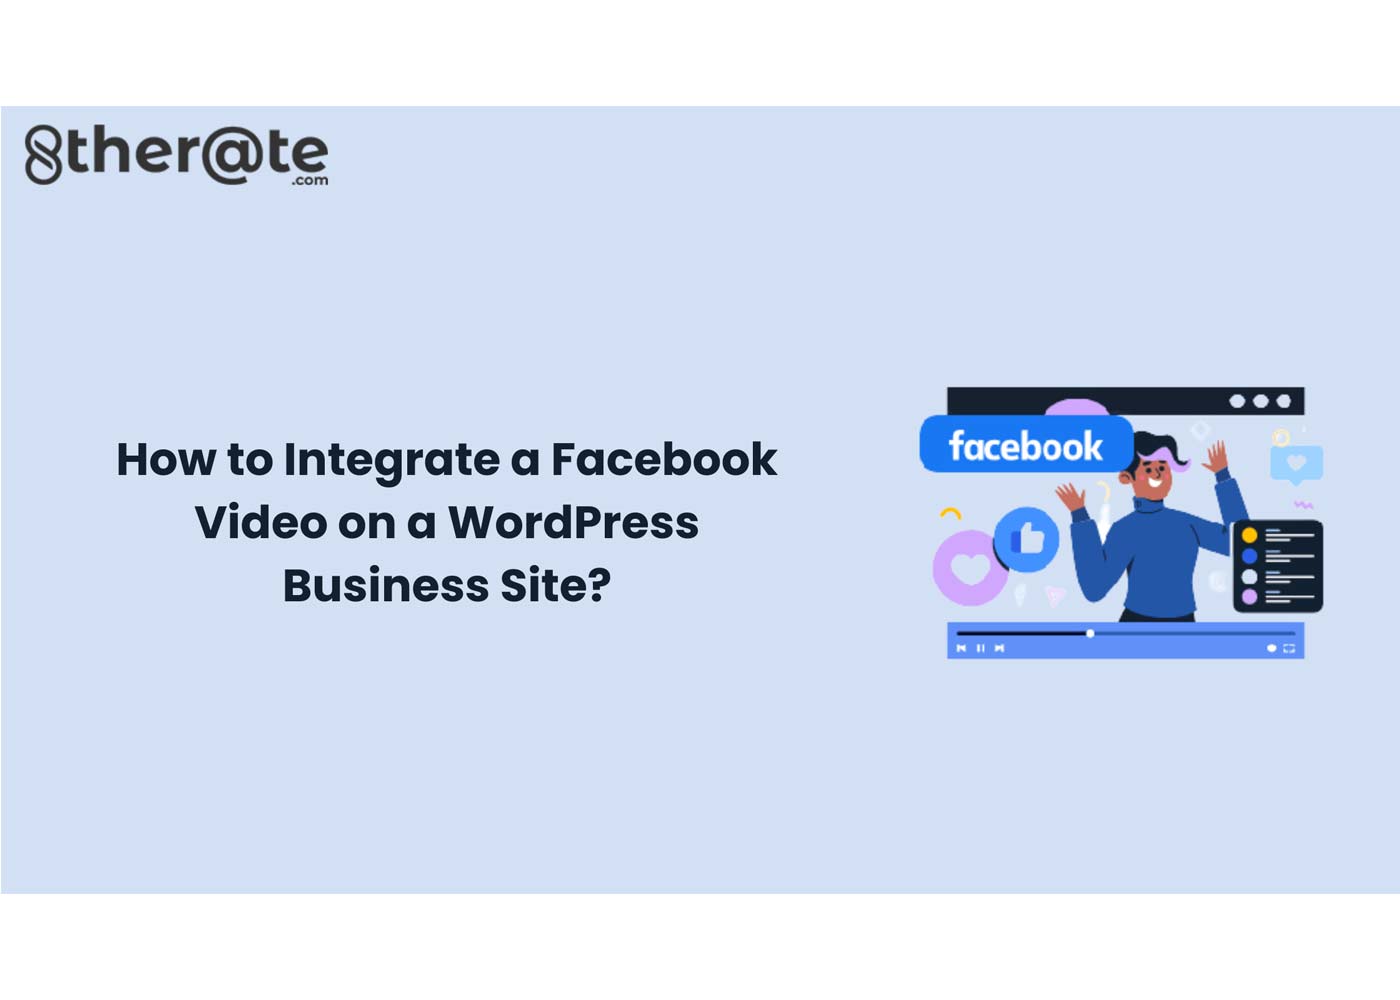 How to Integrate a Facebook Video on a WordPress Business Site